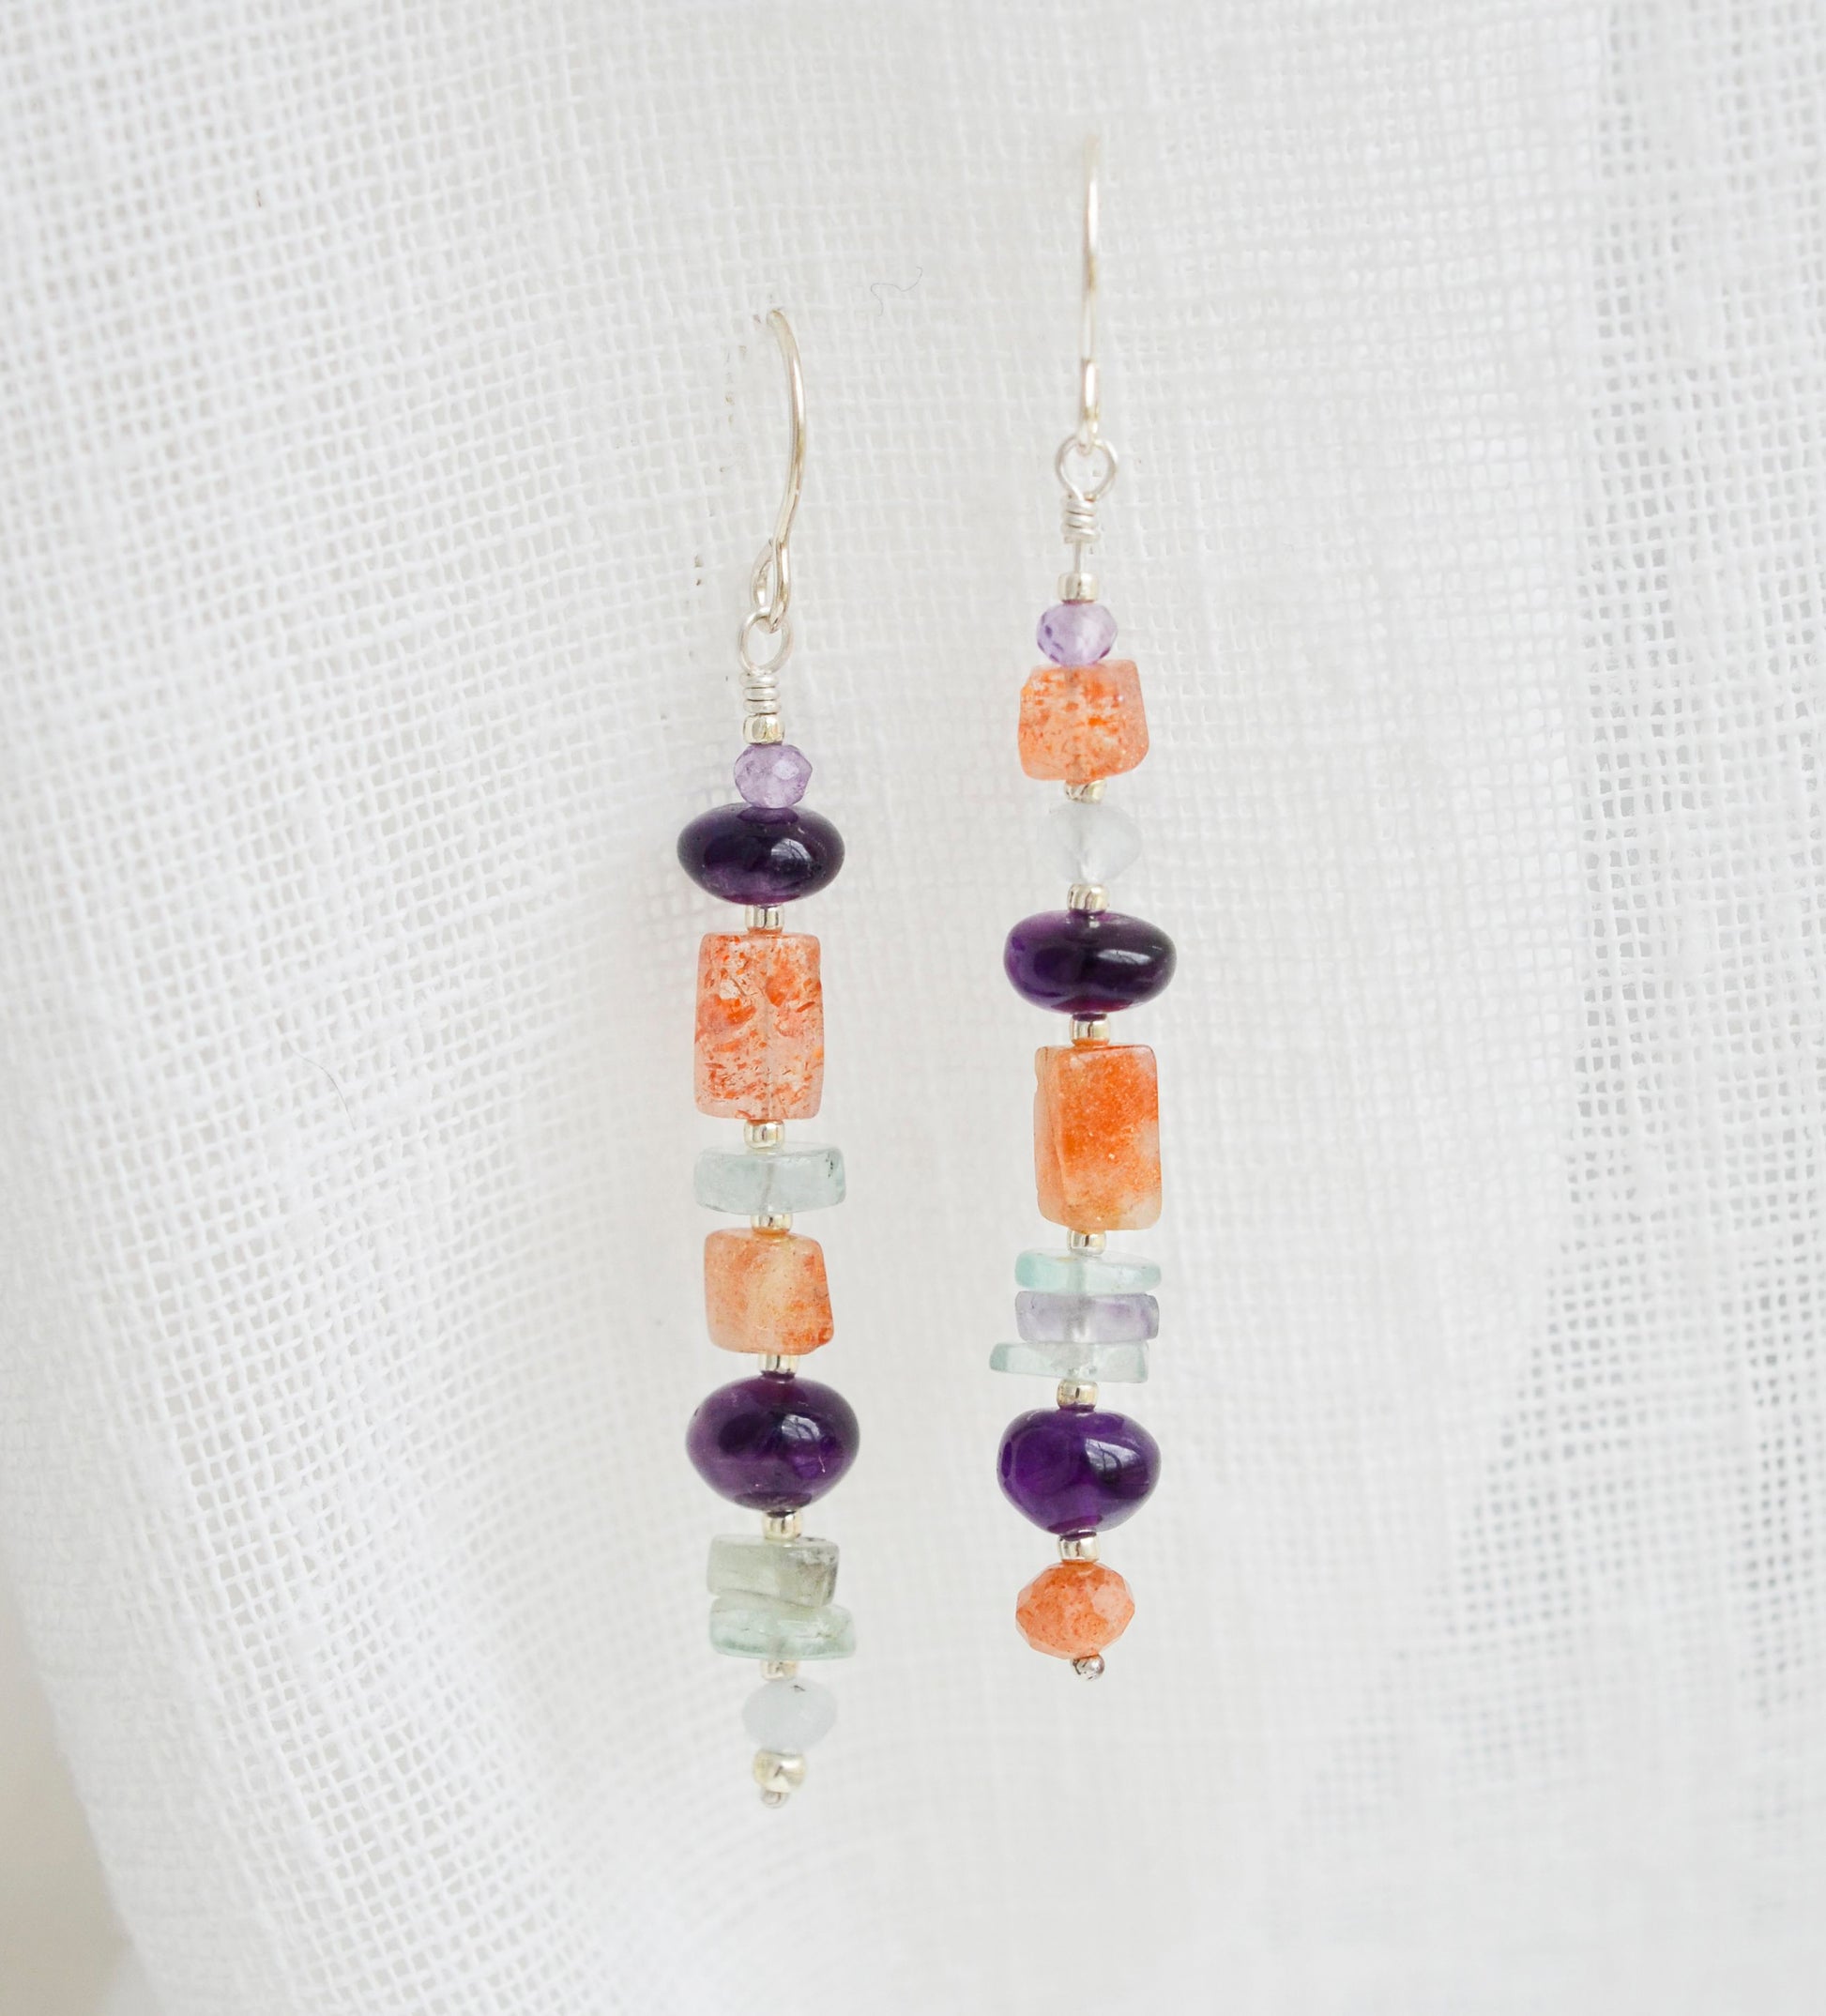 Mismatched gemstone long bar earrings shown in sterling silver. Stones include: amethyst, aquamarine, fluorite, and sunstone. Stones are set onto a long straight bar.